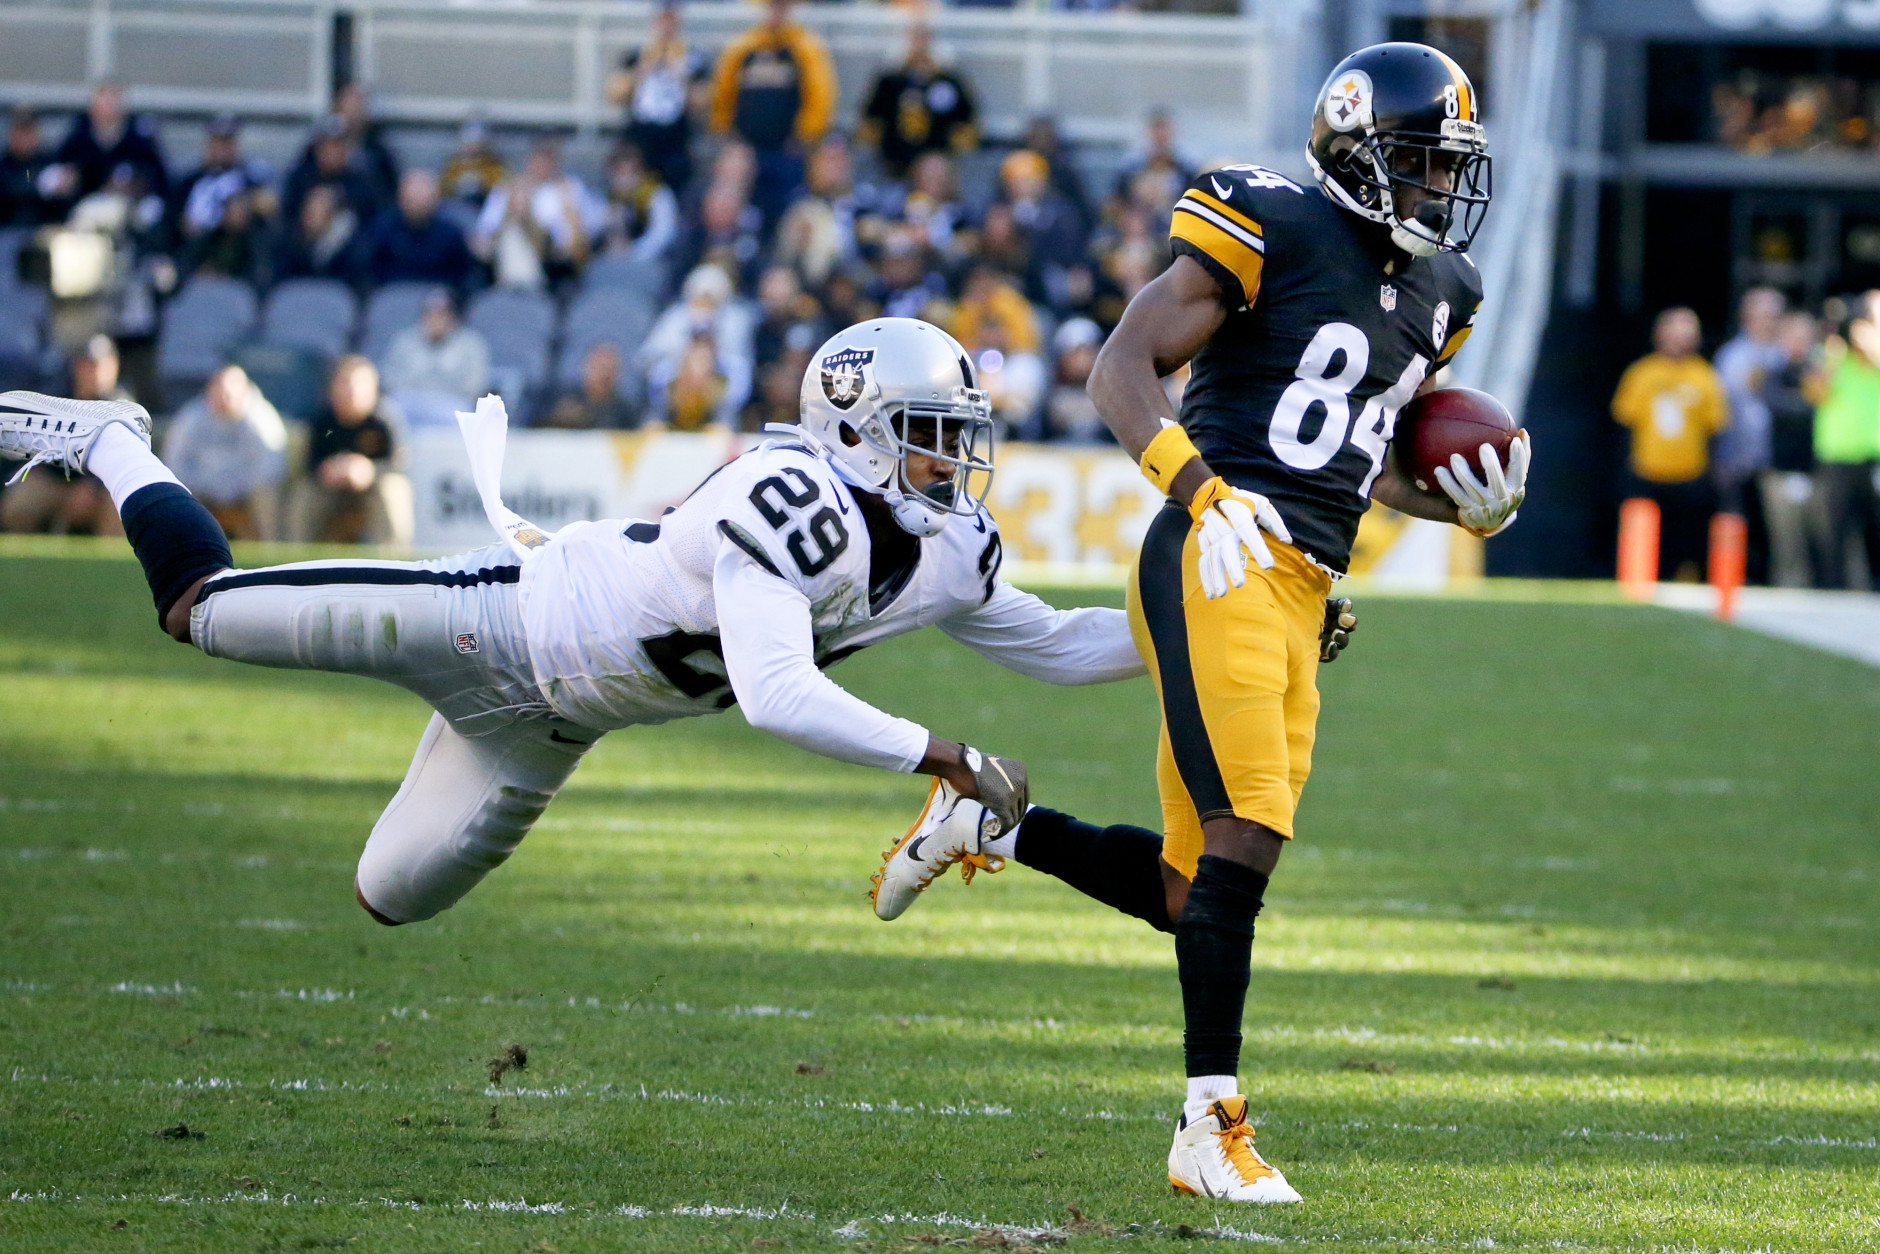 Pittsburgh Steelers wide receiver Antonio Brown (84) makes a catch past Oakland Raiders cornerback David Amerson (29) in the first half of an NFL football game Sunday, Nov. 8, 2015, in Pittsburgh. (AP Photo/Gene J. Puskar)